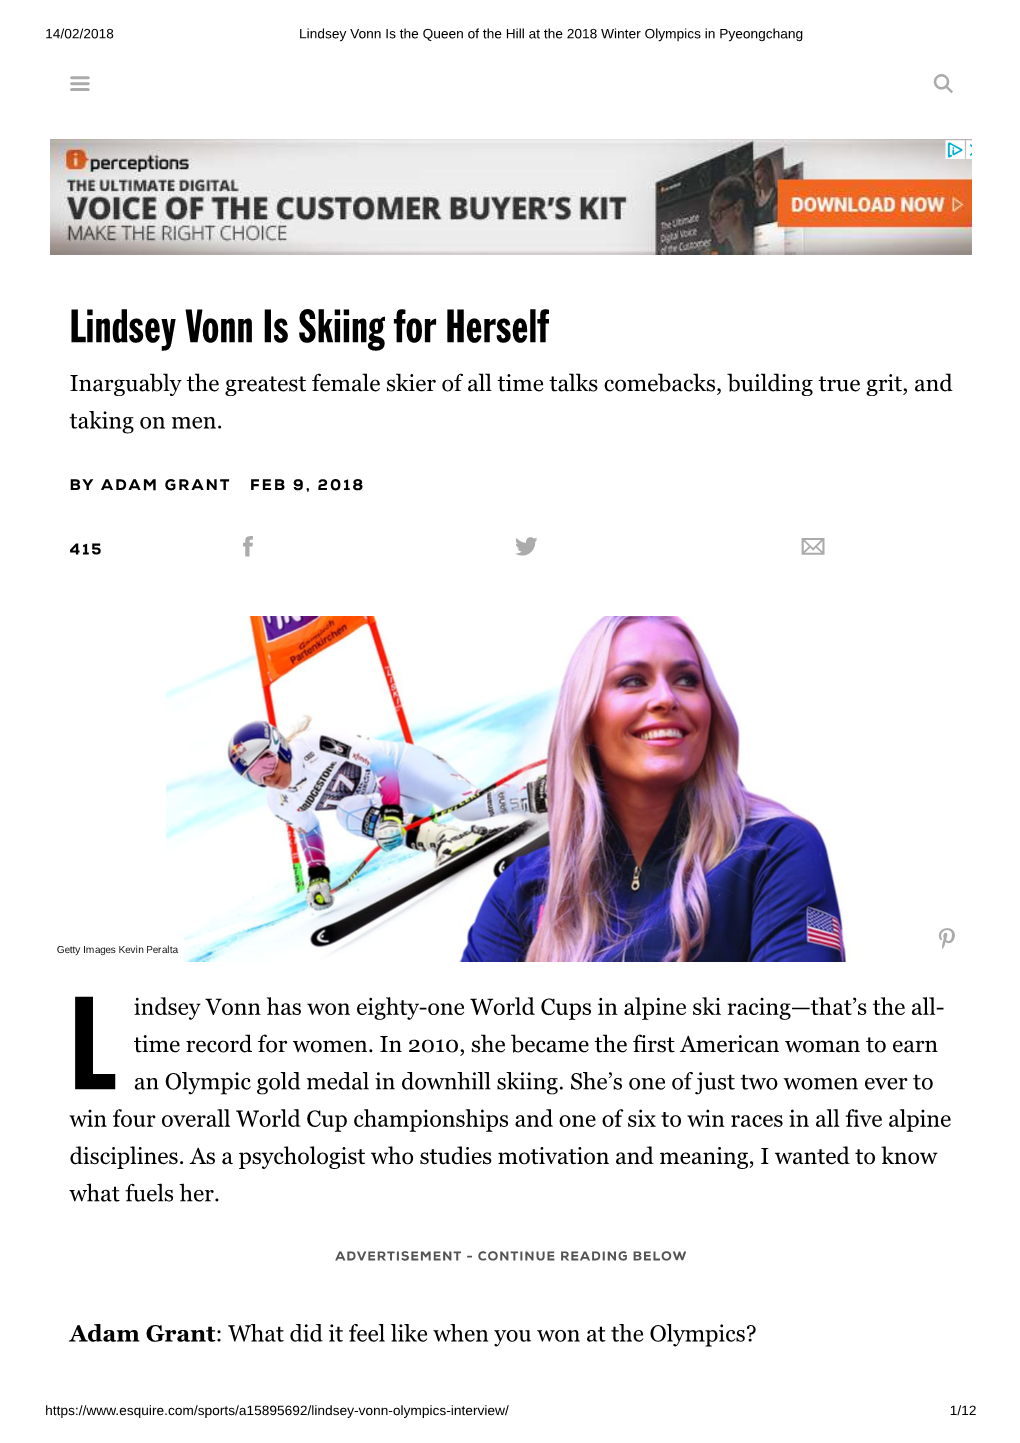 Lindsey Vonn Is Skiing for Herself Inarguably the Greatest Female Skier of All Time Talks Comebacks, Building True Grit, and Taking on Men